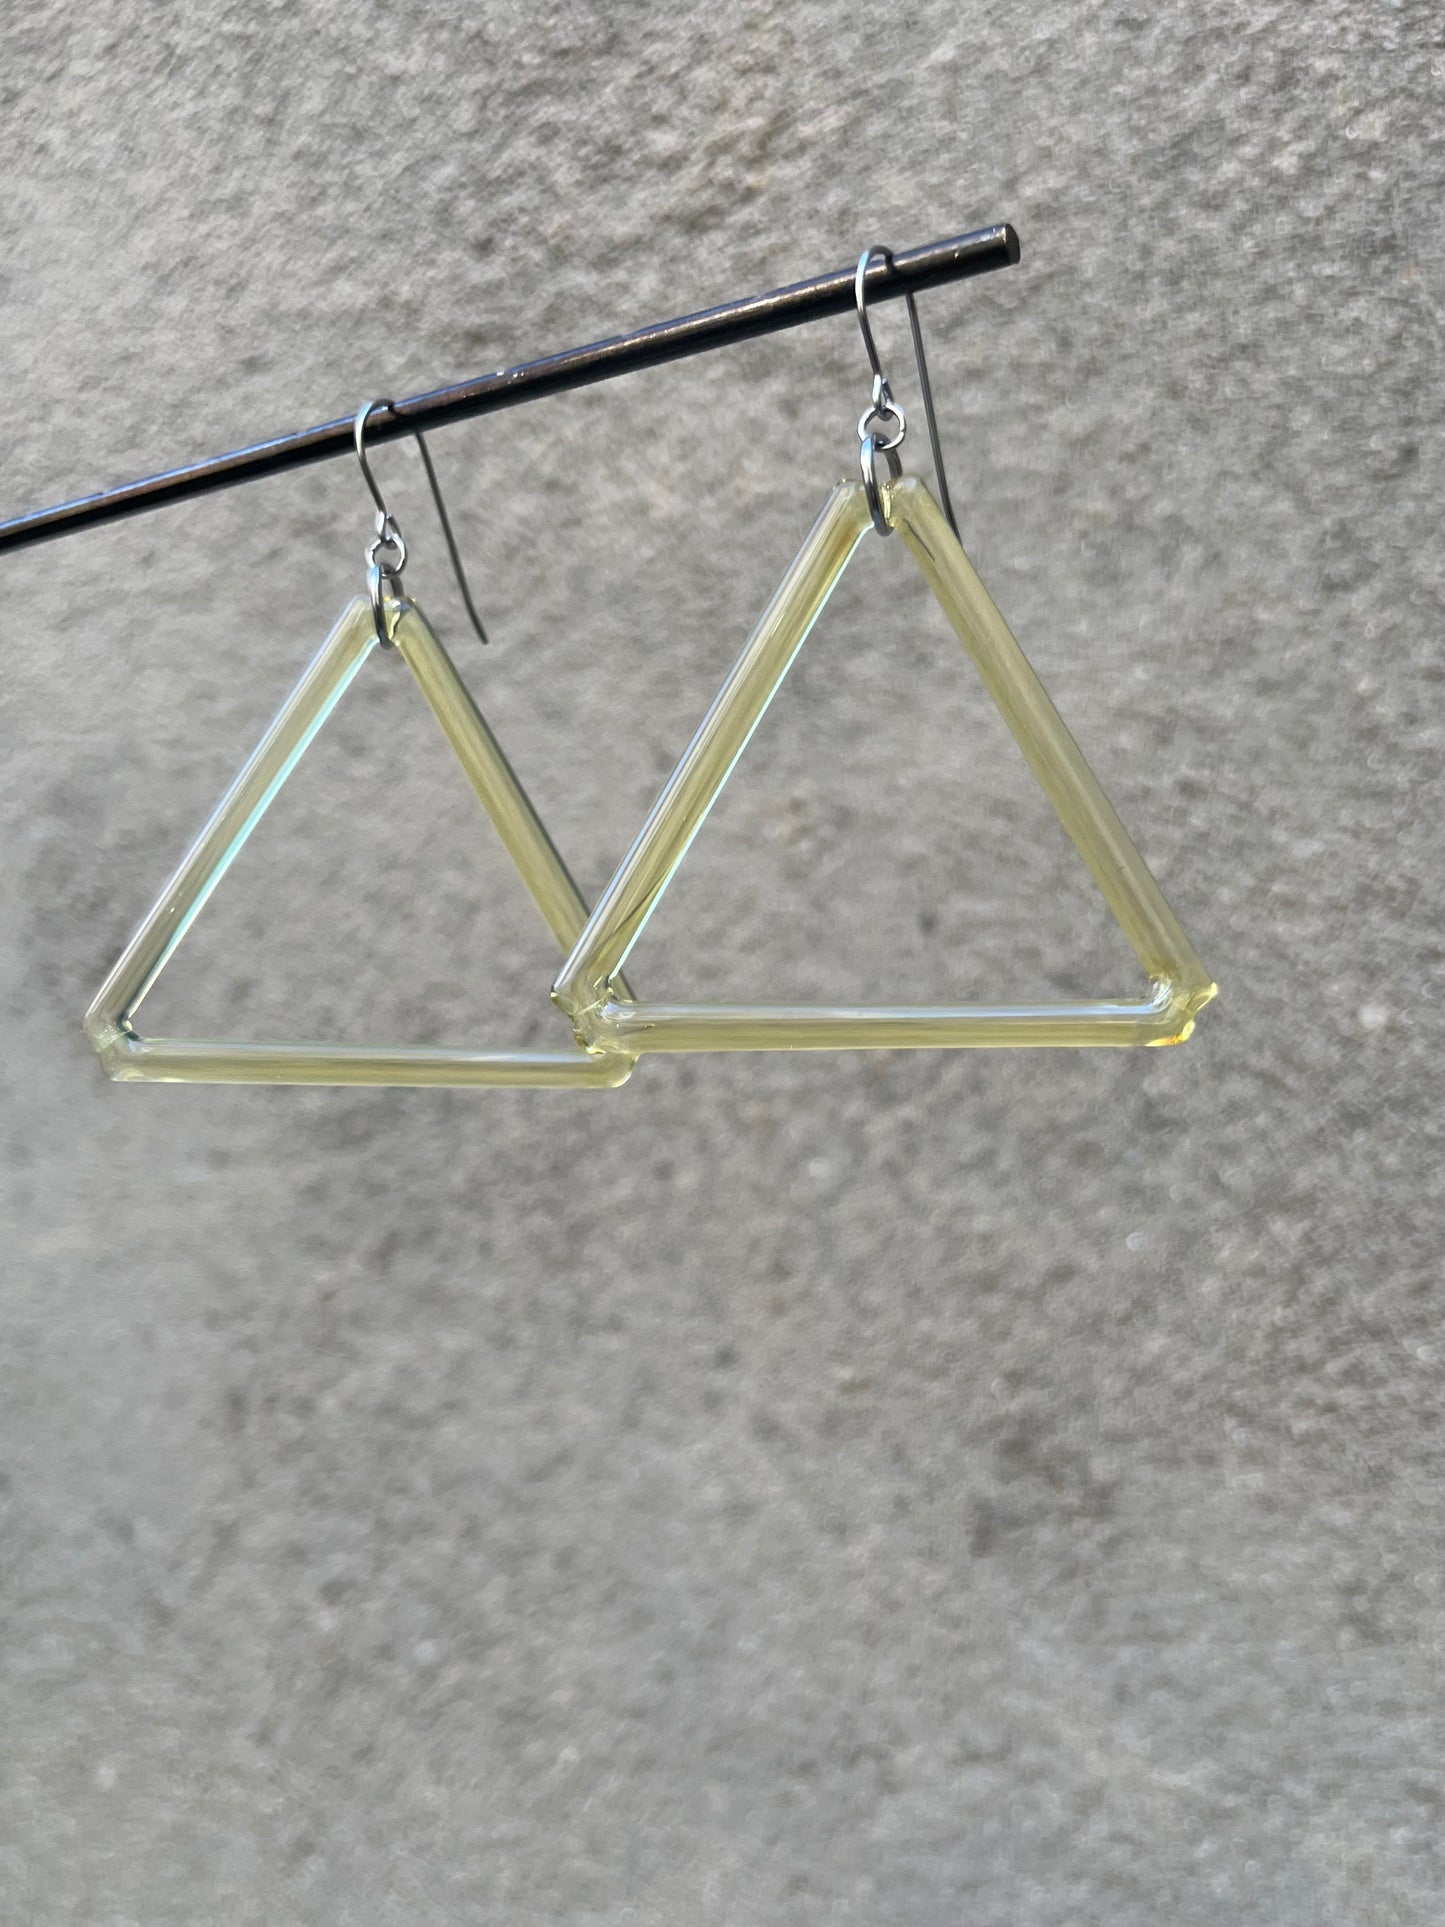 The XL Glass Triangle Earrings